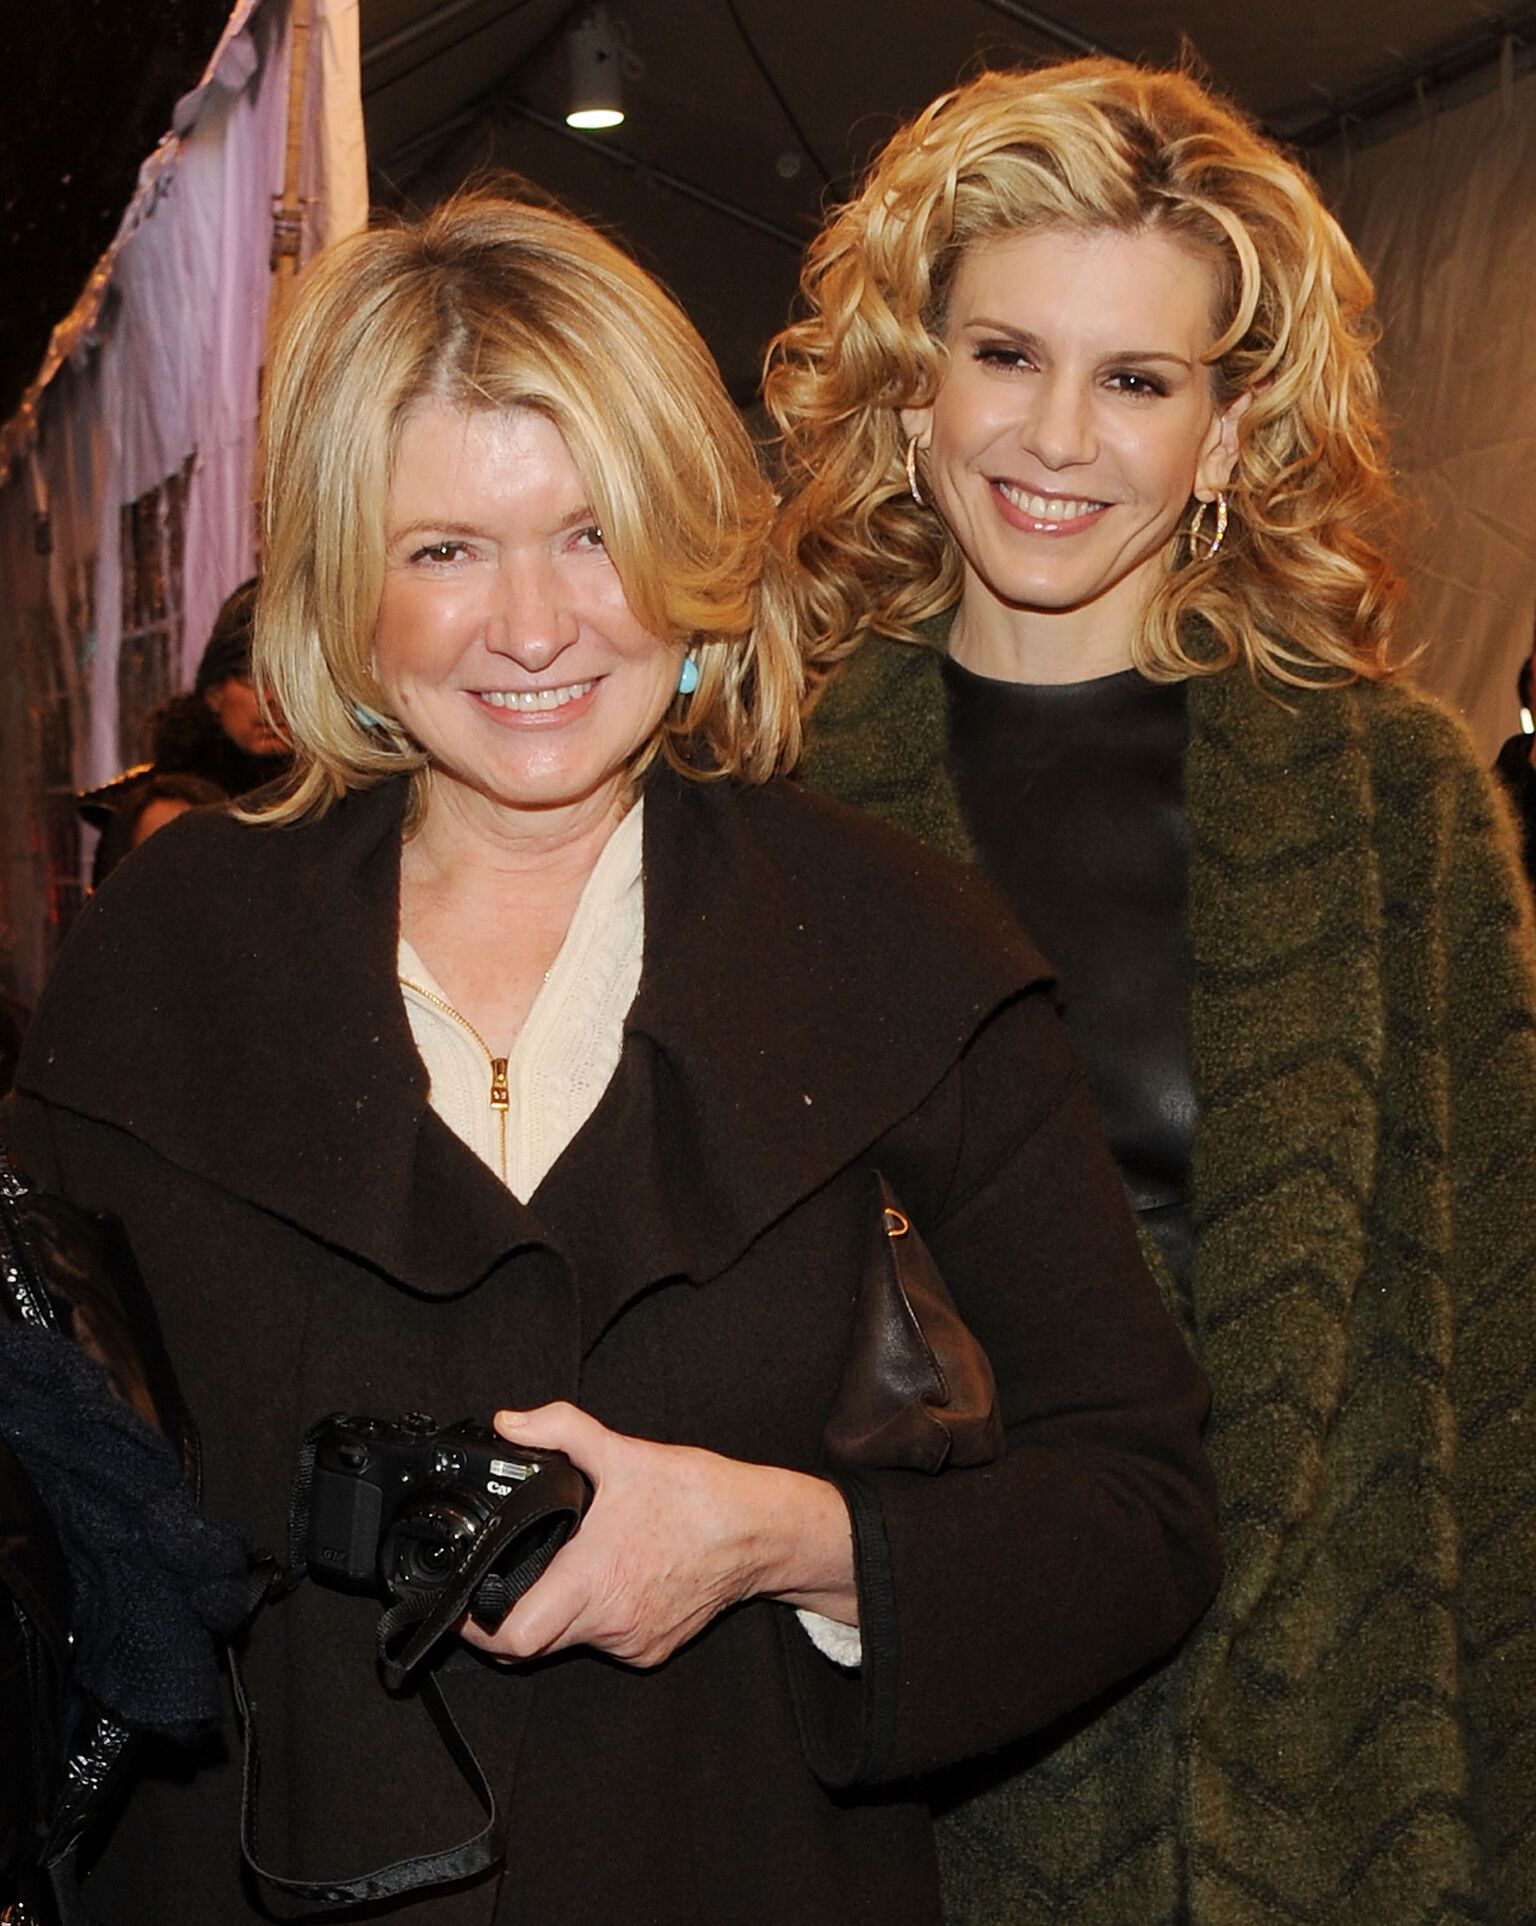 Martha Stewart and Alexis Stewart attend Paul McCartney plays World Famous Apollo Theater for first time, celebrating 20 Million Sirius XM Subscribers | Getty Images